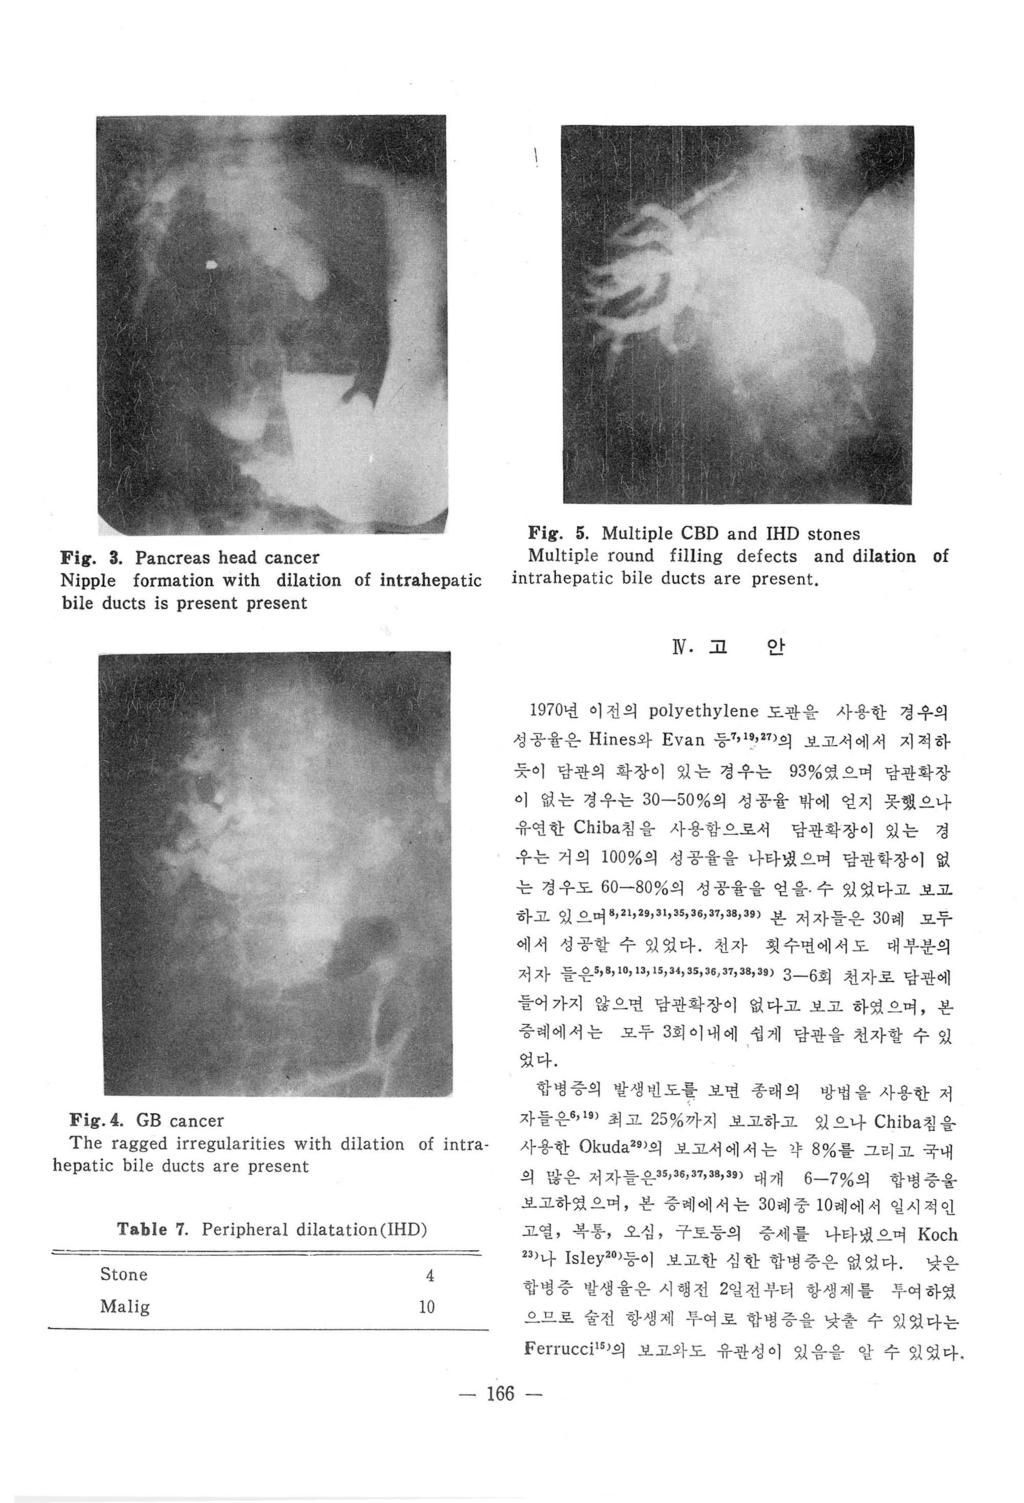 Fig. 3. Pancreas head cancer Nipple foration with dilation of intrahepatic bile ducts is present present Fig. 5.